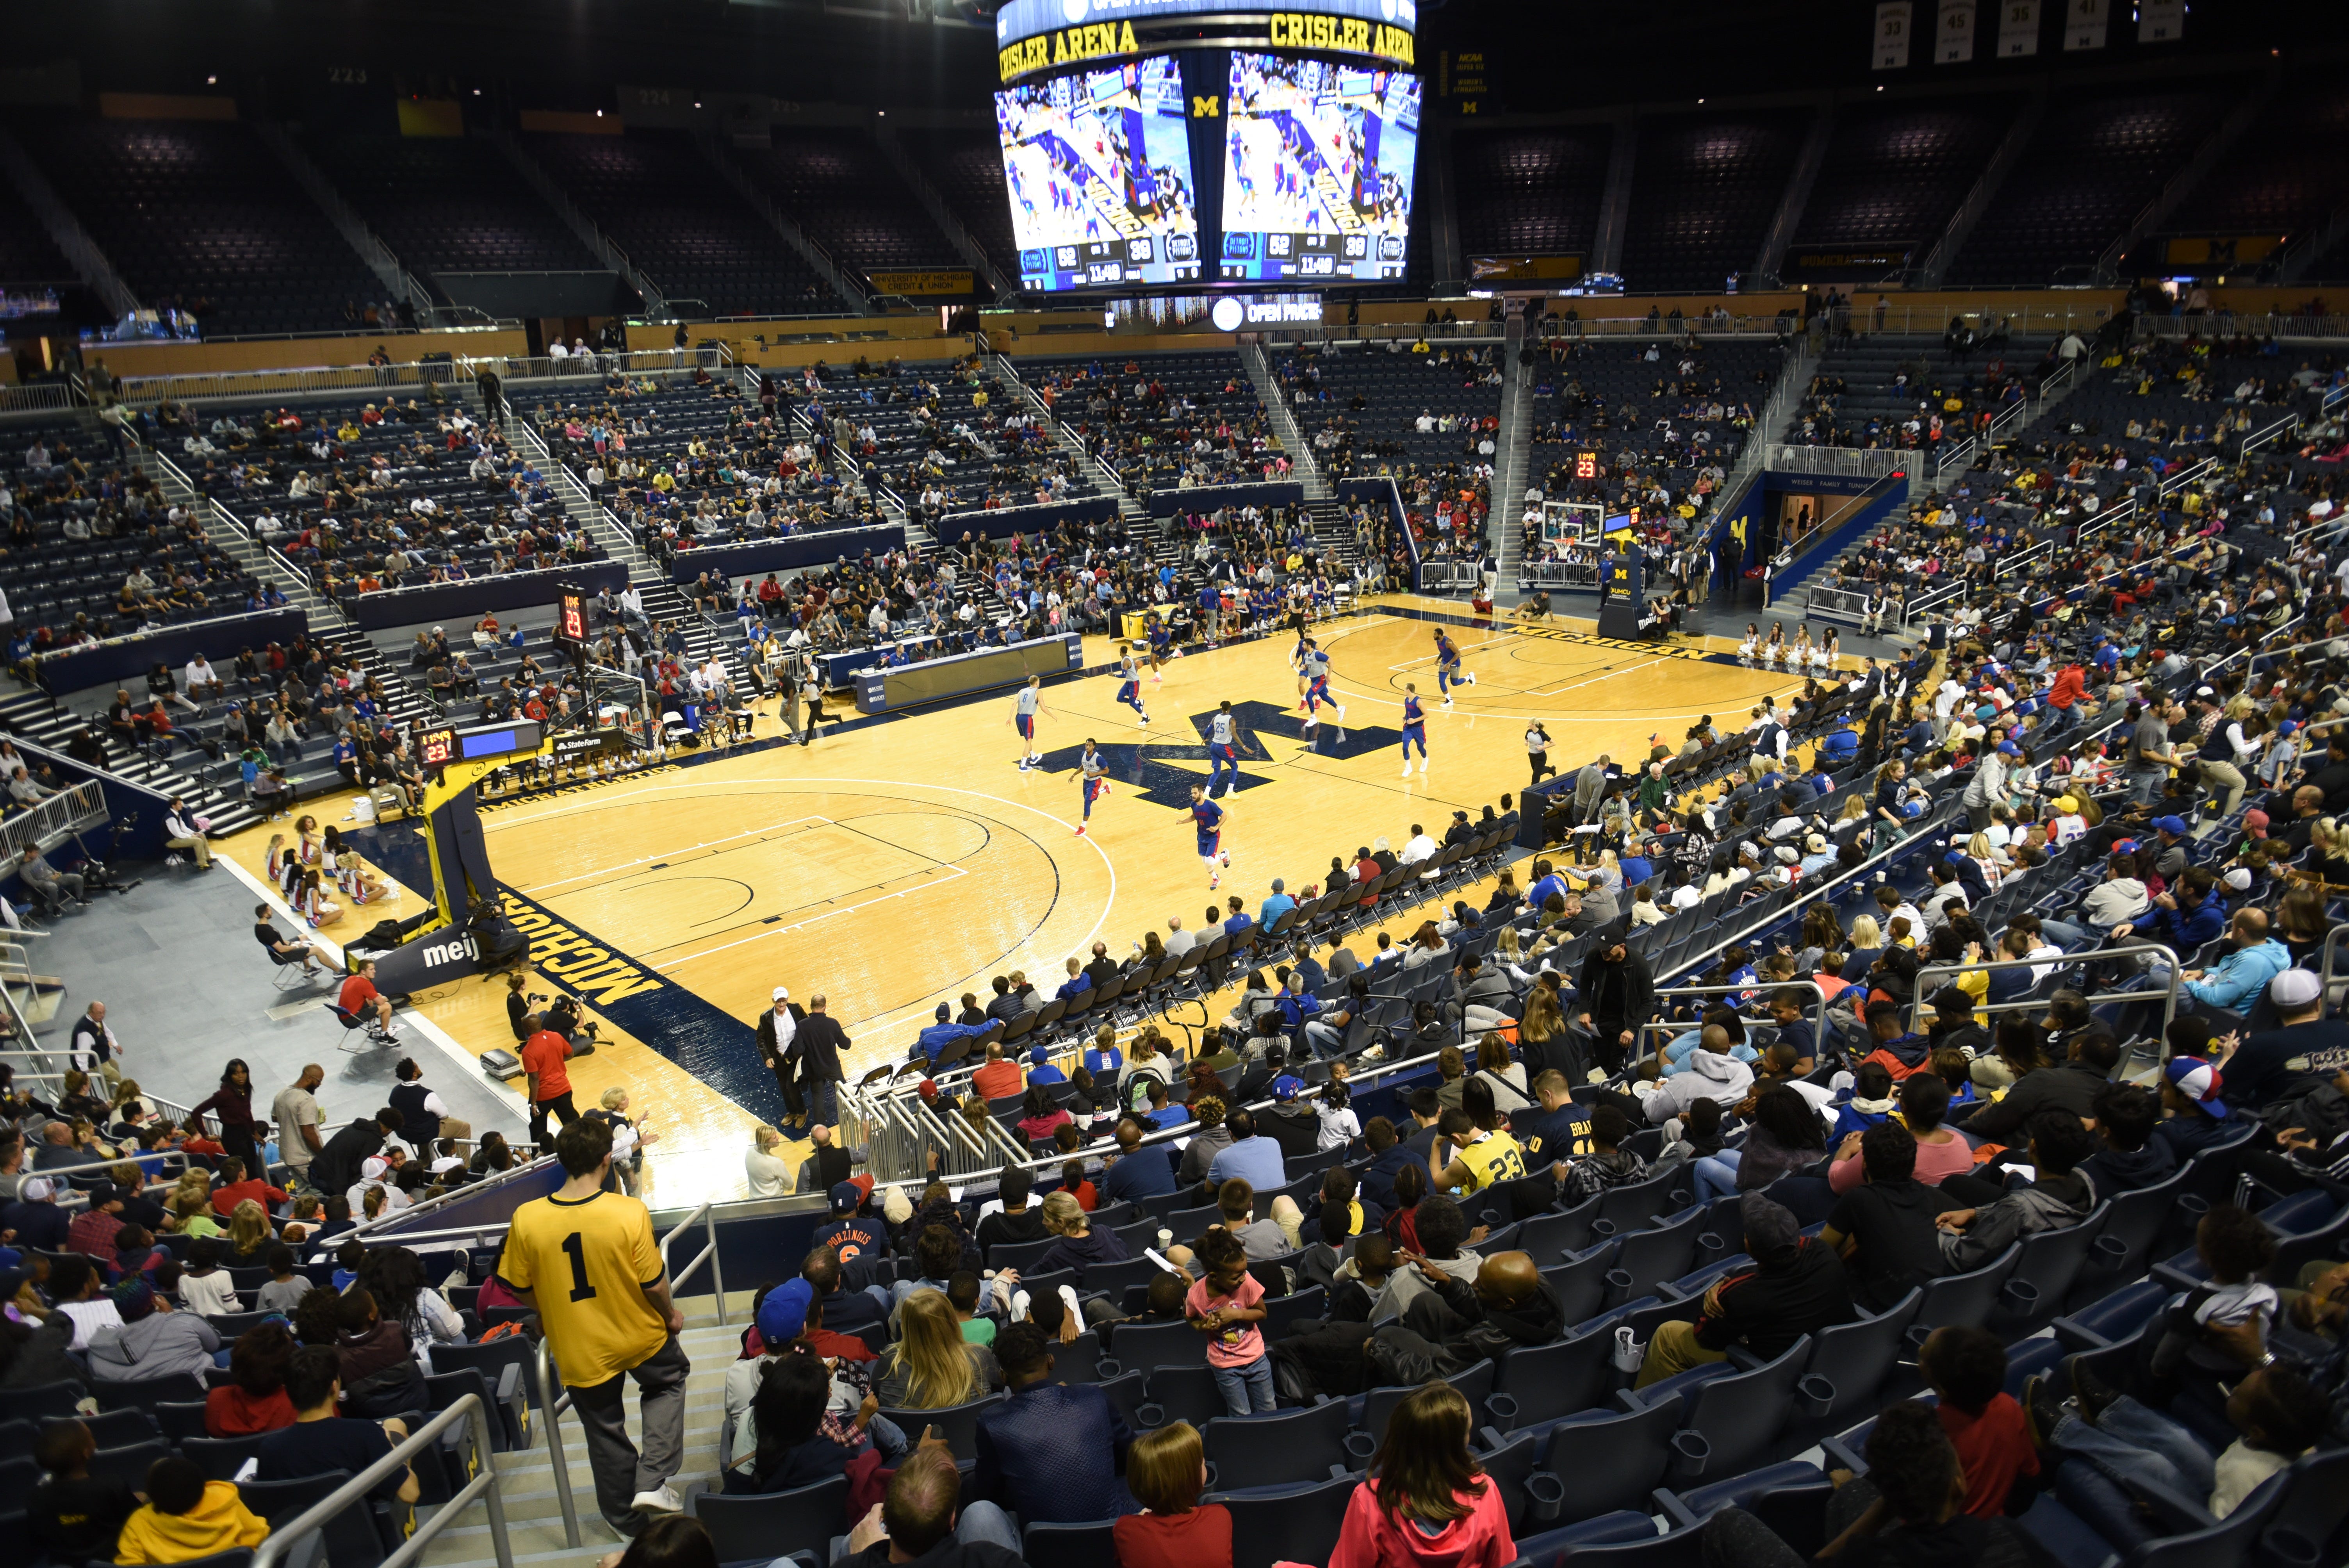 A large crowd filled Crisler Center in Ann Arbor on Saturday.